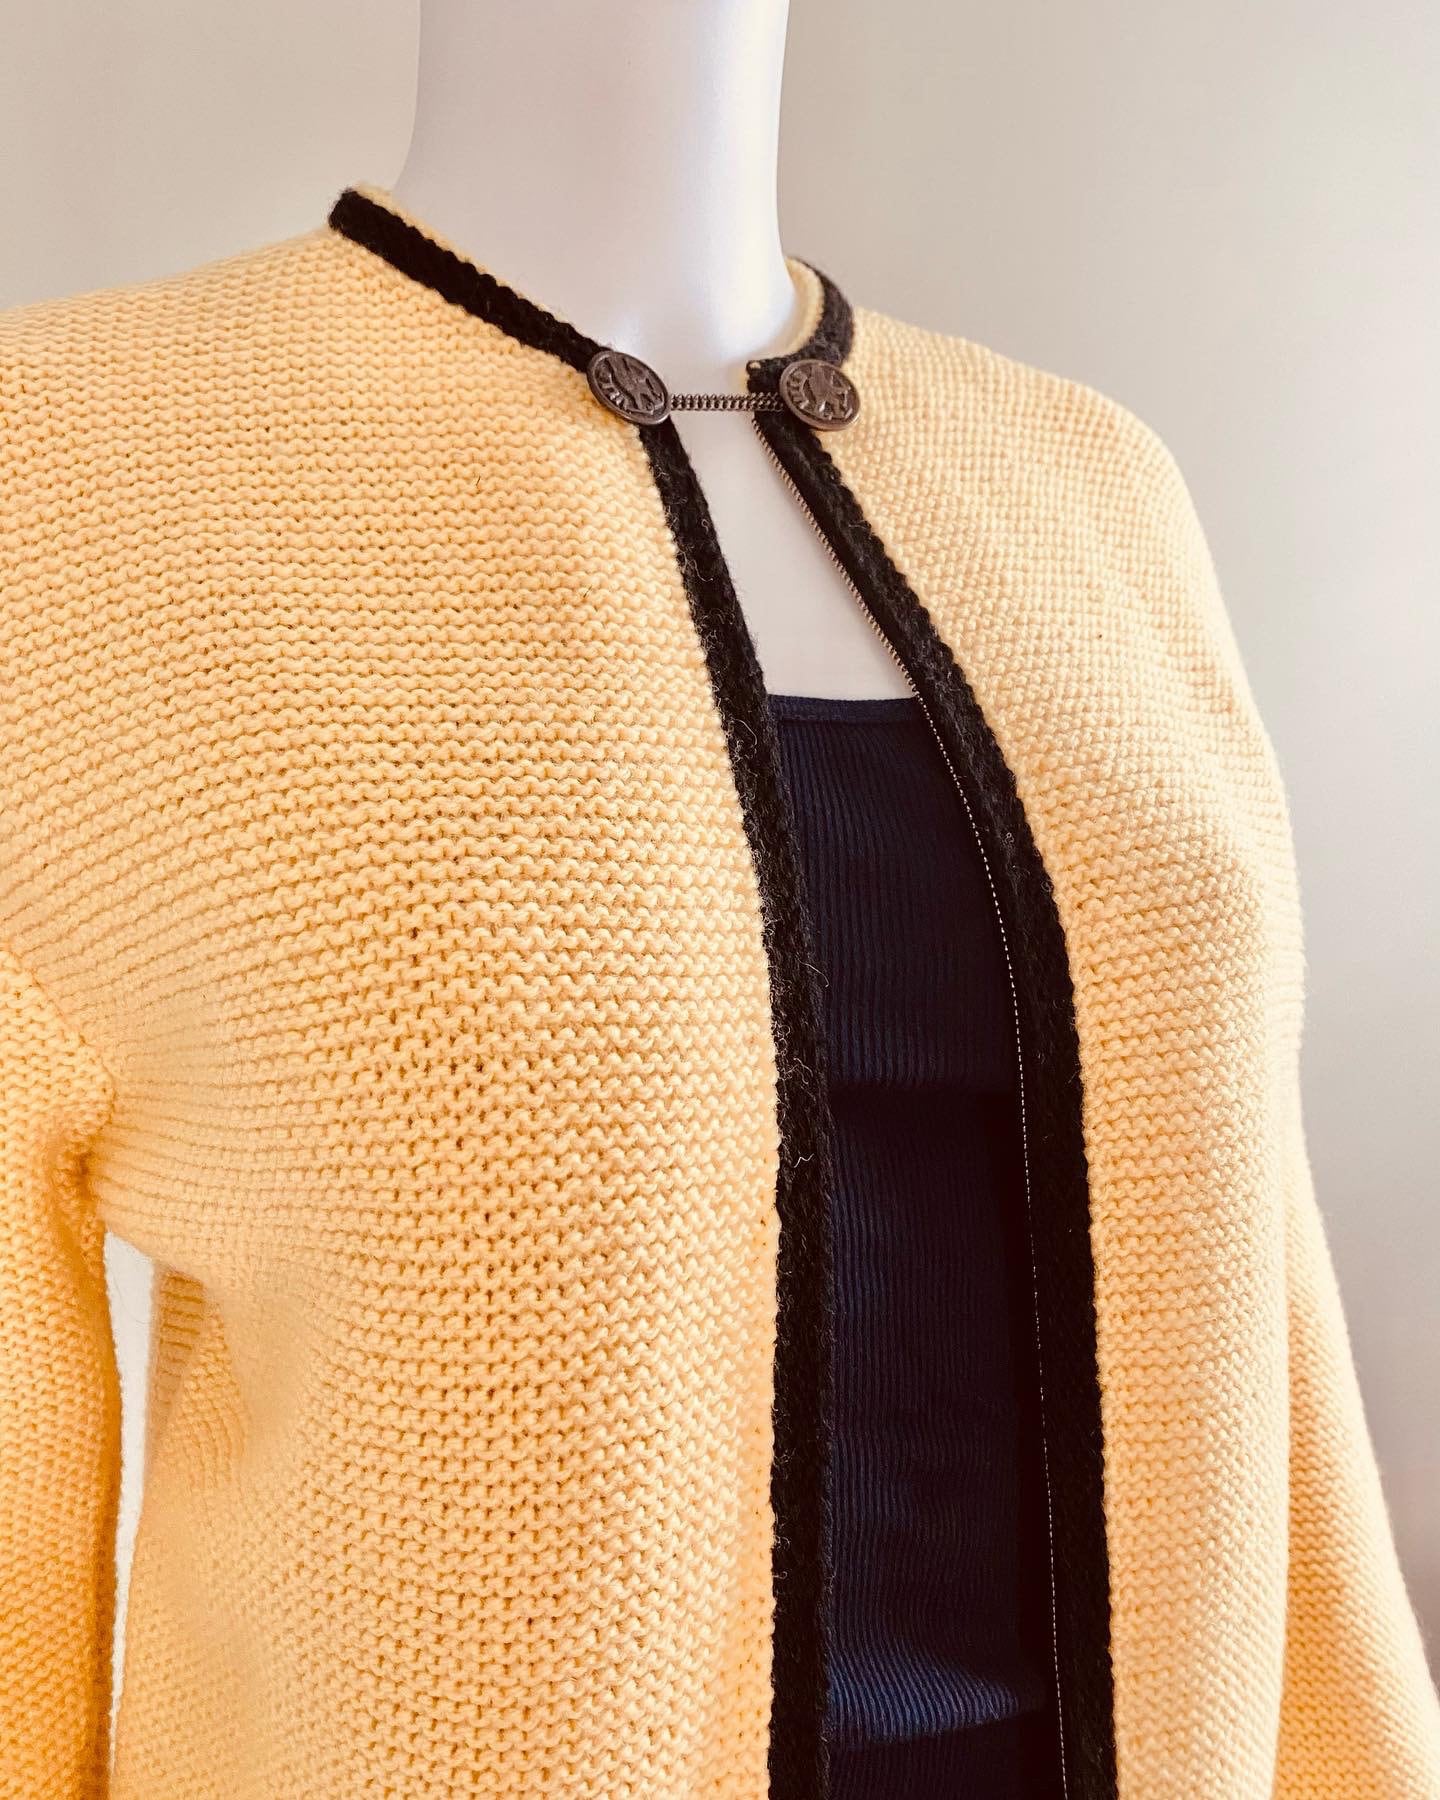 Vintage 1950s Cream and Black Cardigan / 50s chunky sweater Size L XL